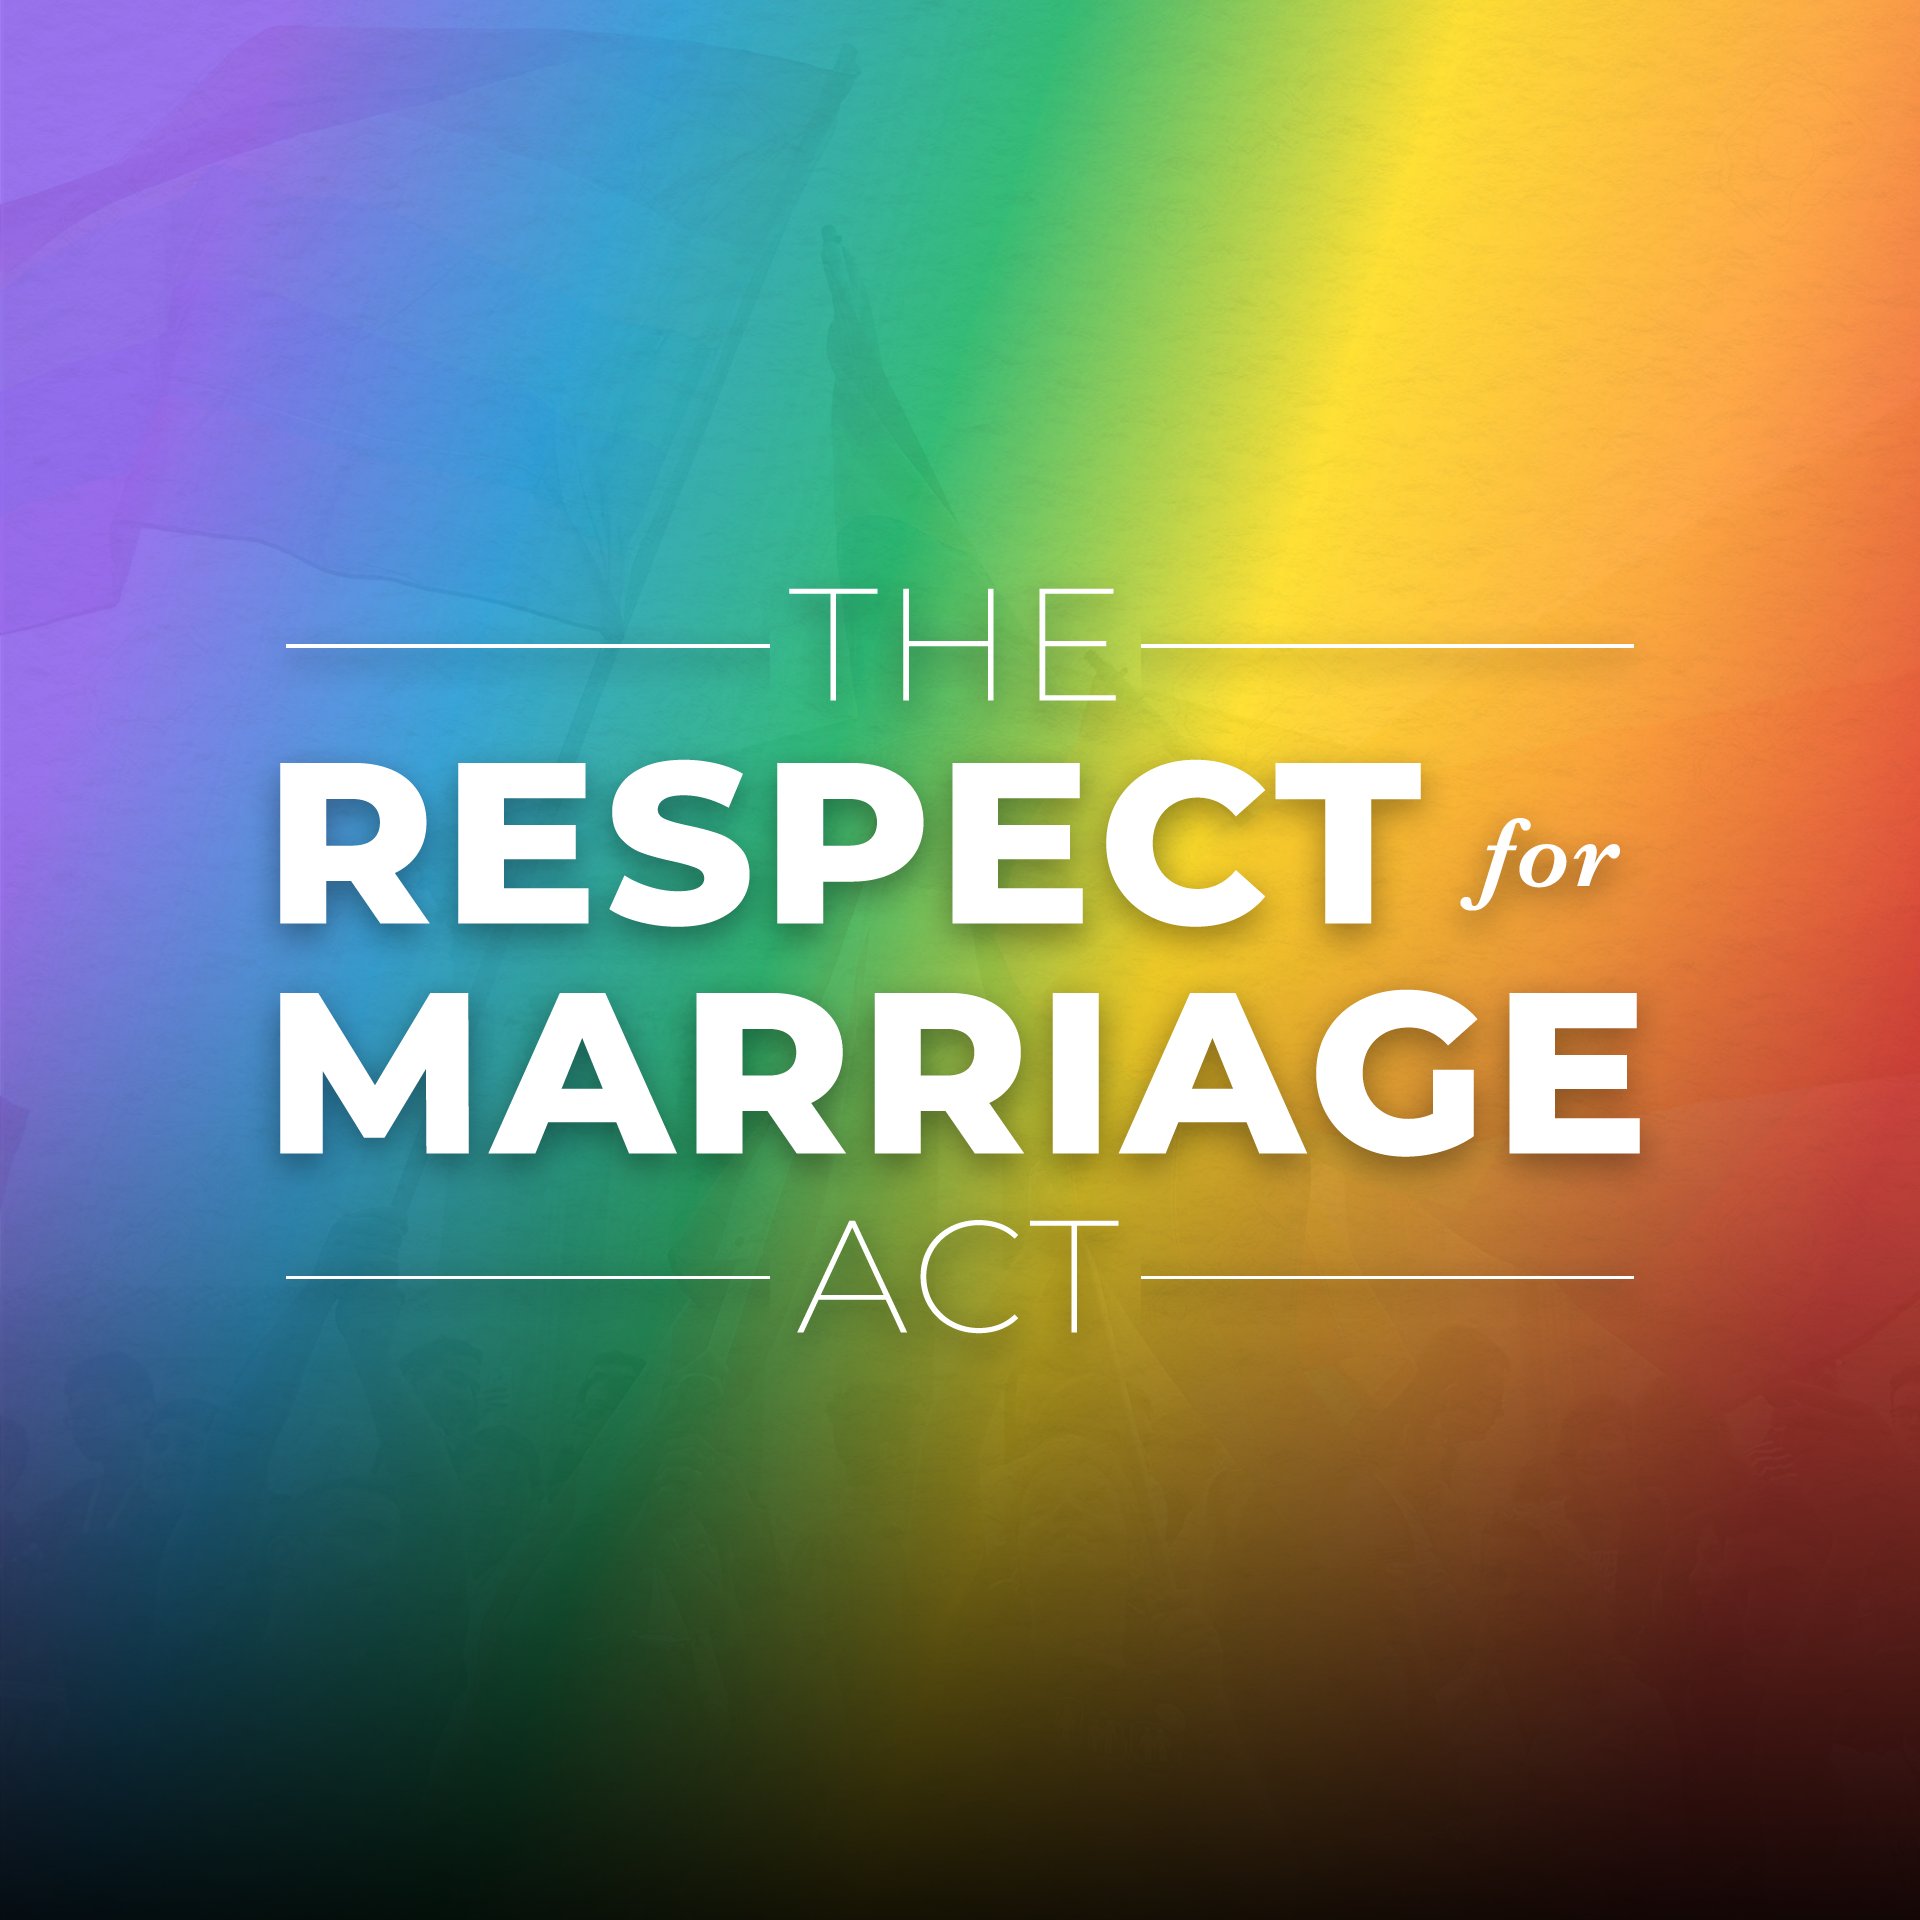 Original post from Tammy Baldwin, a co-sponsor of the Respect for Marriage Act